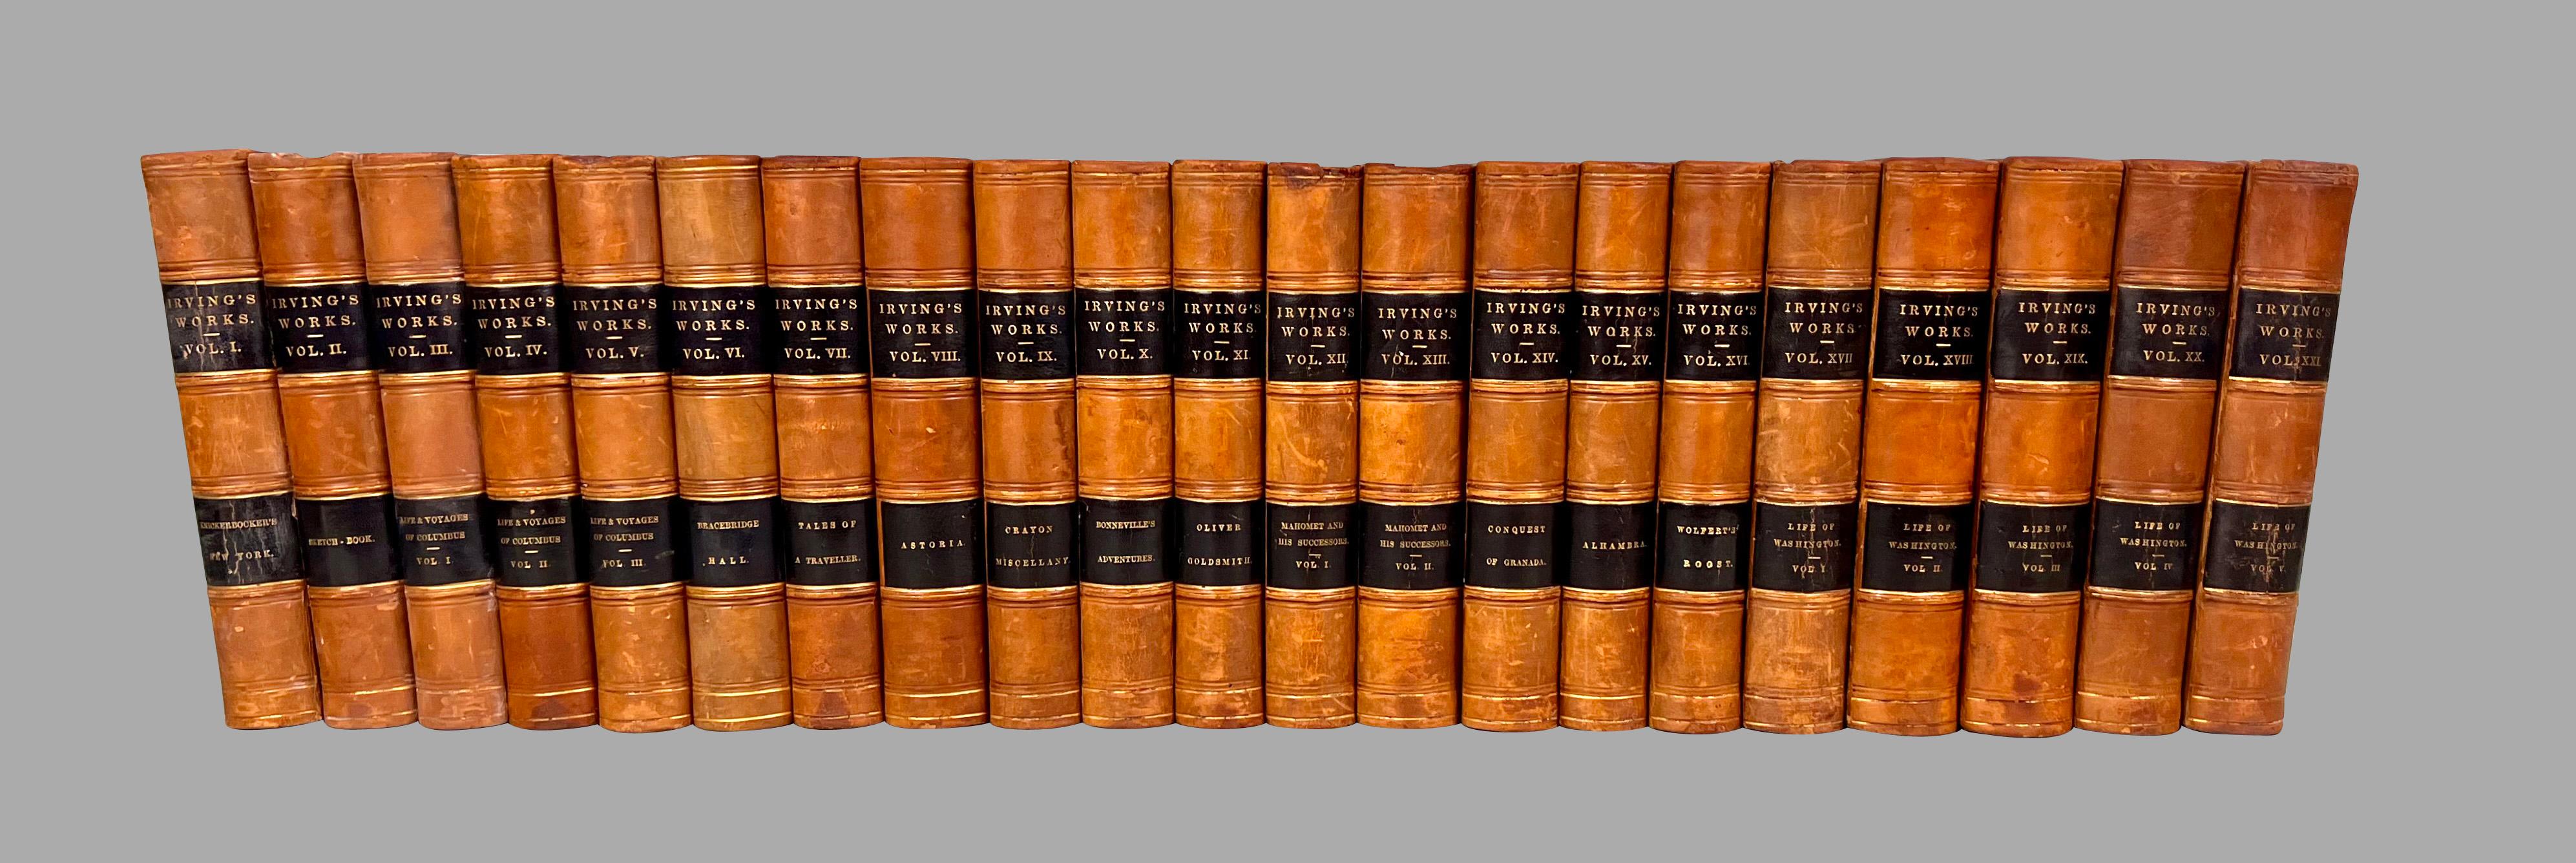 An attractive set of the works of Washington Irving in half-leather bindings with marbled boards and edges, comprising Life of Washington, volumes 1-5; and the Works of Washington Irving volumes 1-XVI. Published New York: G.P. Putman, 1860. In